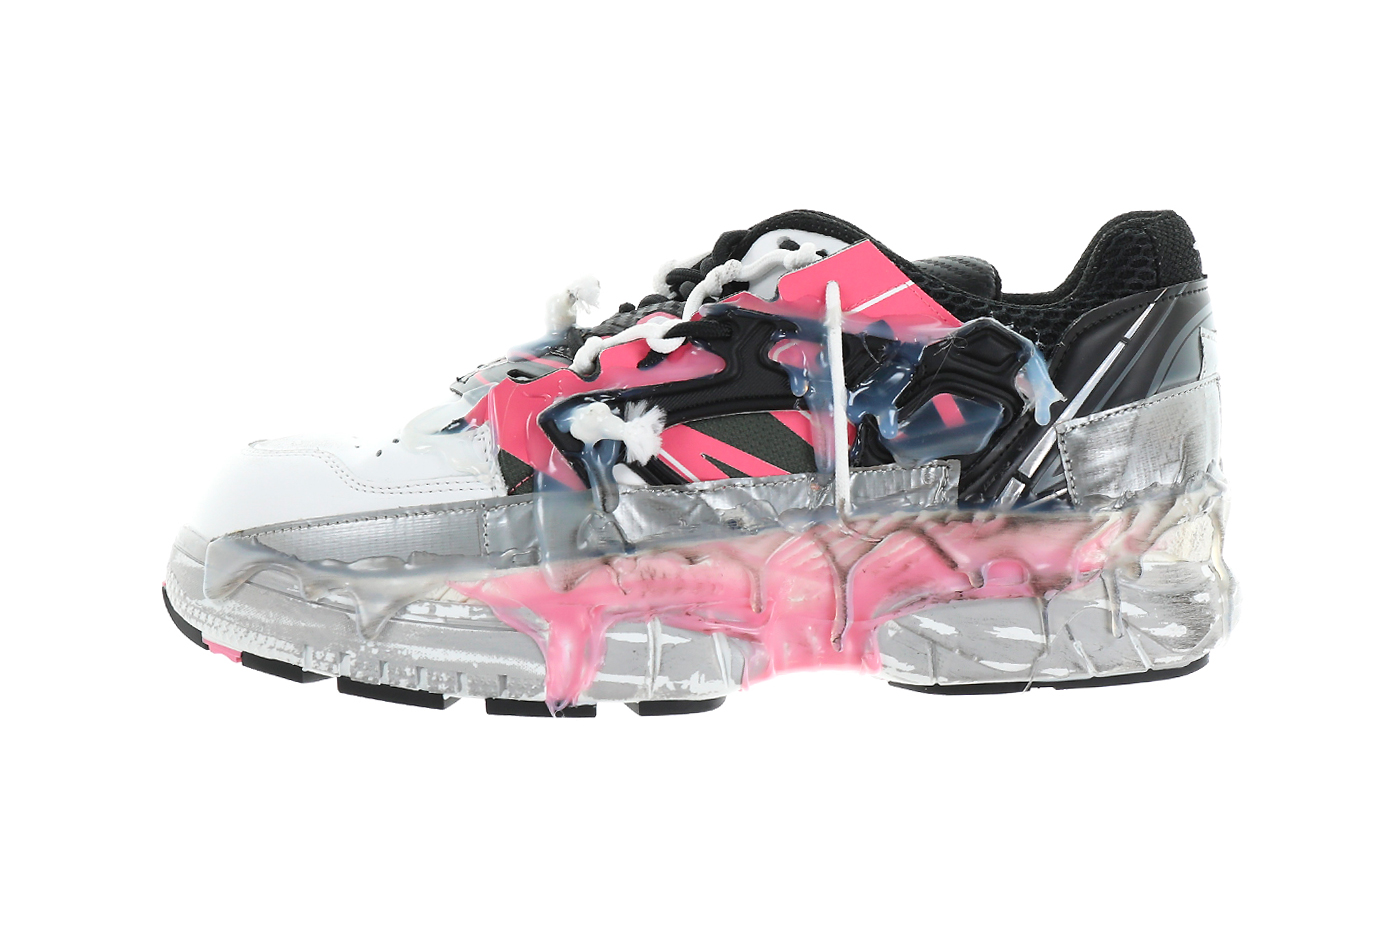 Maison Margiela Fusion Low Top Sneakers “Bubblegum Mix" Release info deconstructed hot glue duct tape maximalism shoes footwear distressed S57WS0257 Nubian Cow Leather  drop date price 